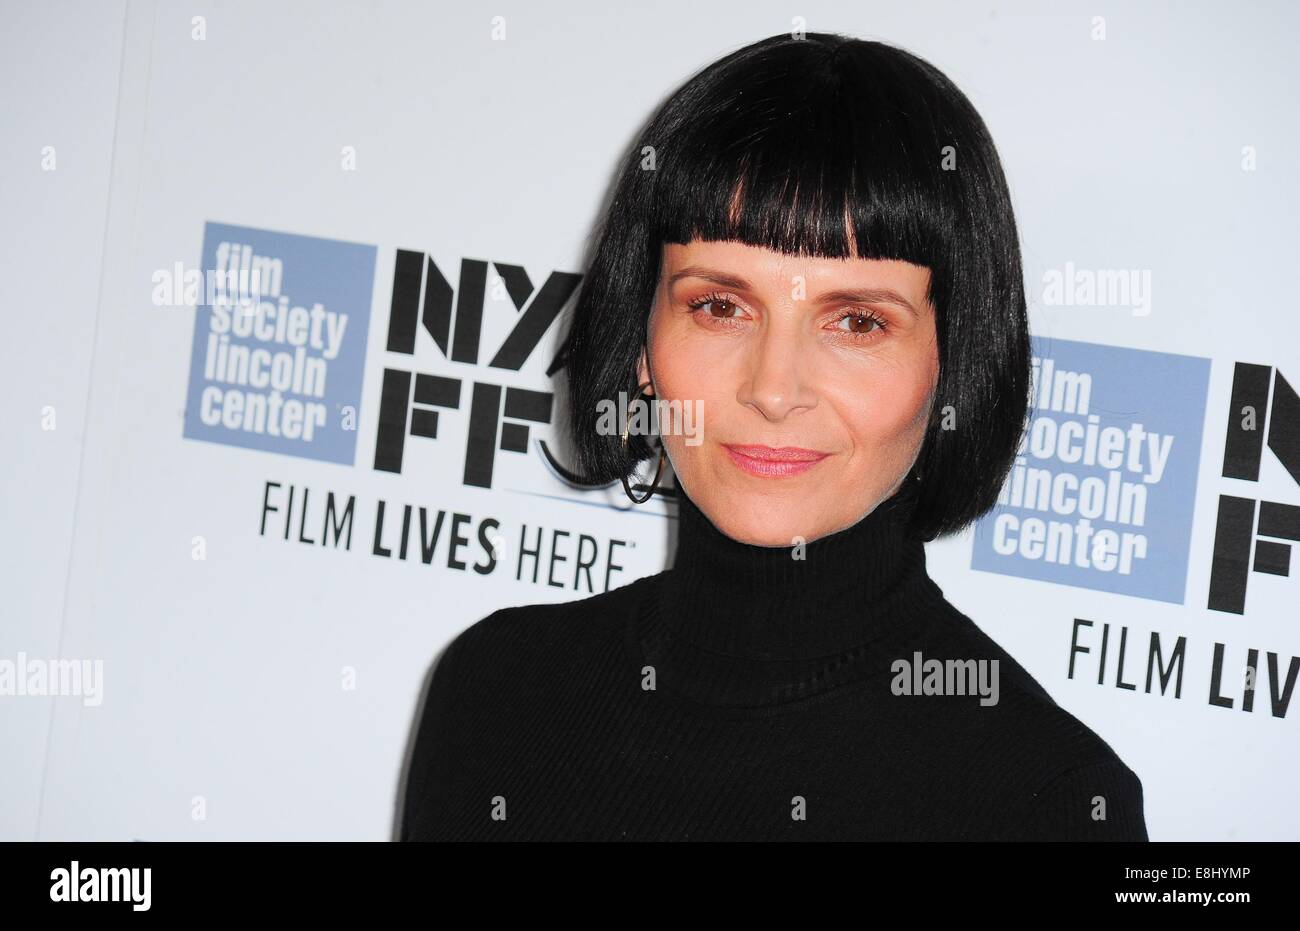 New York, USA. 8th October, 2014. Juliette Binoche at arrivals for CLOUDS OF SILS MARIA Premiere at the 52nd New York Film Festival, Alice Tully Hall at Lincoln Center, new, NY October 8, 2014. Photo By: Gregorio T. Binuya/Everett Collection/ Alamy Live News Stock Photo